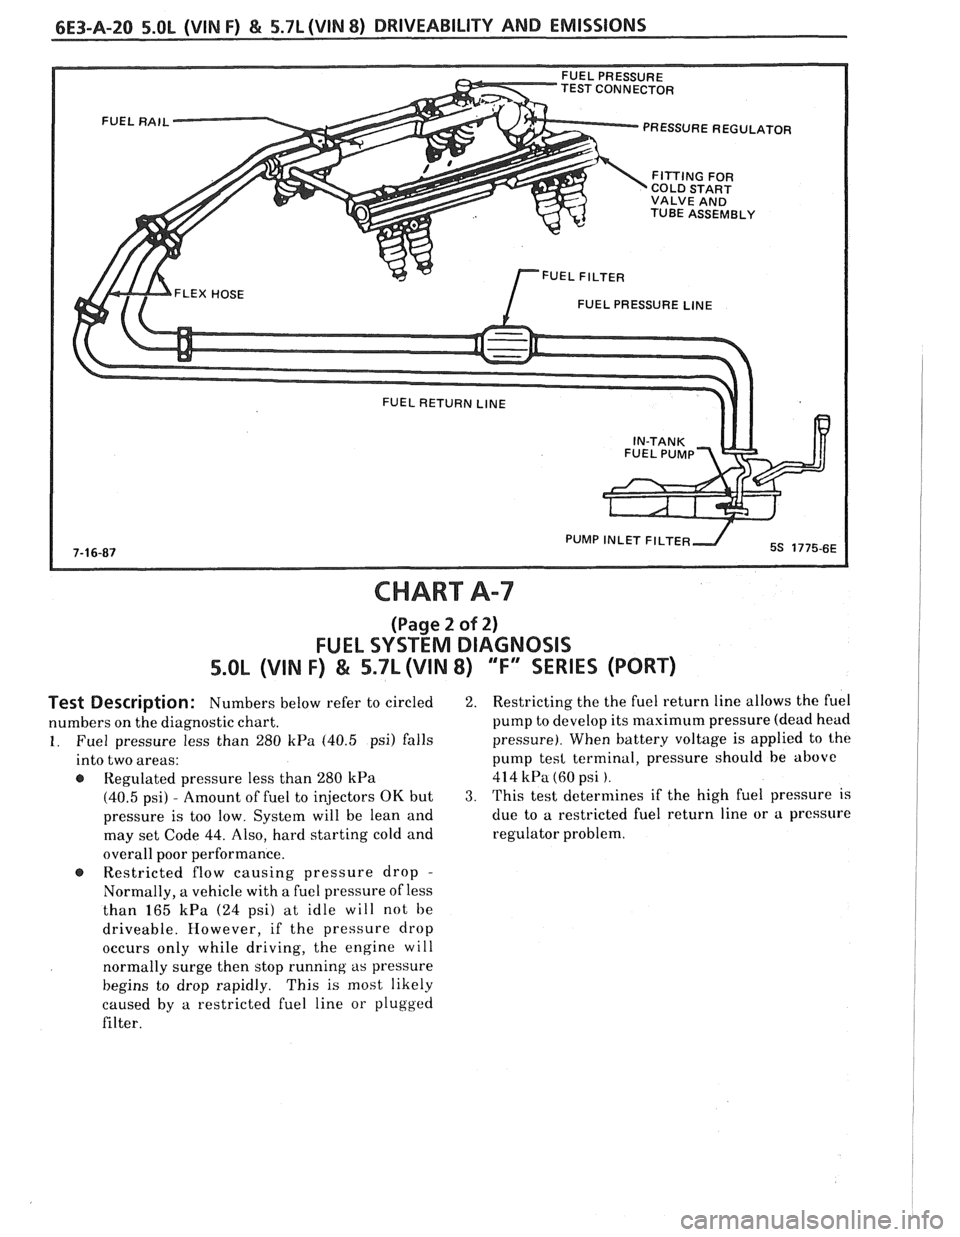 PONTIAC FIERO 1988  Service Repair Manual 
TEST CONNECTOR PRESSURE REGULATOR 
COLD  START 
VALVE  AND 
TUBE  ASSEMBLY 
FUEL  PRESSURE 
LINE 
PUMP  INLET FlLTE 
CHART A-7 
(Page 2 of 2) 
FUEL SYSTEM  DIAGNOSIS 
5.OL (VIN F) & 5.7L (VIN 8) "F" 